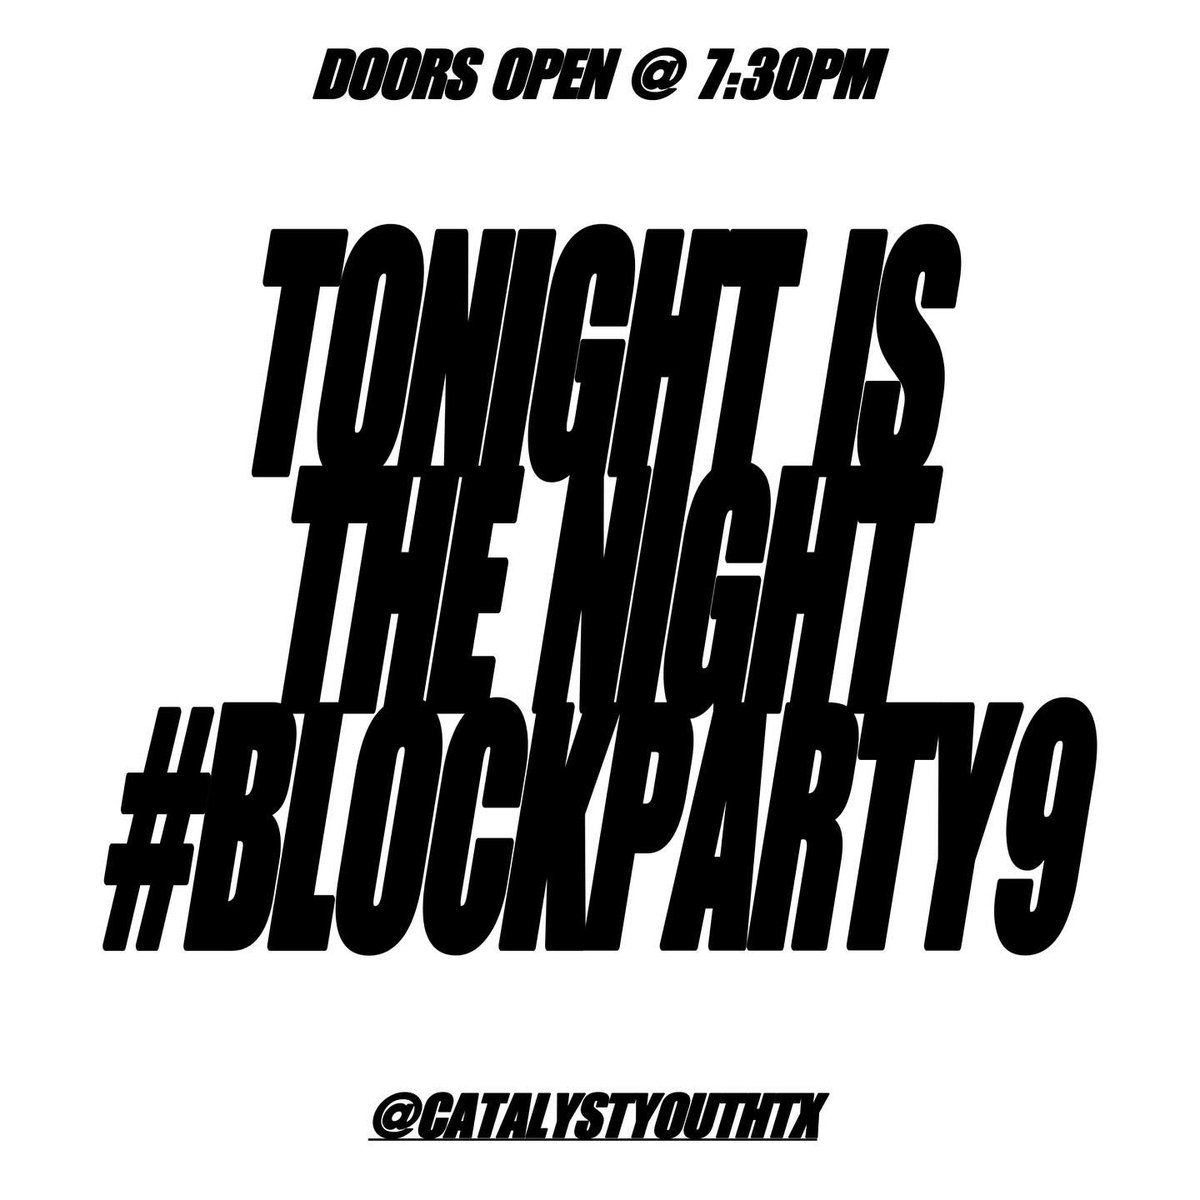 TONIGHT IS THE NIGHT 🩶💬🥹 We can’t wait to get everyone in the room for #BLOCKPARTY9 ! We have YTH + YA headed in from all over TX … We want you to be one of them in the room tonight! There’s no better place to be tonight! [ BP9 —> DOORS OPEN @ 7:30PM —> SATX ]